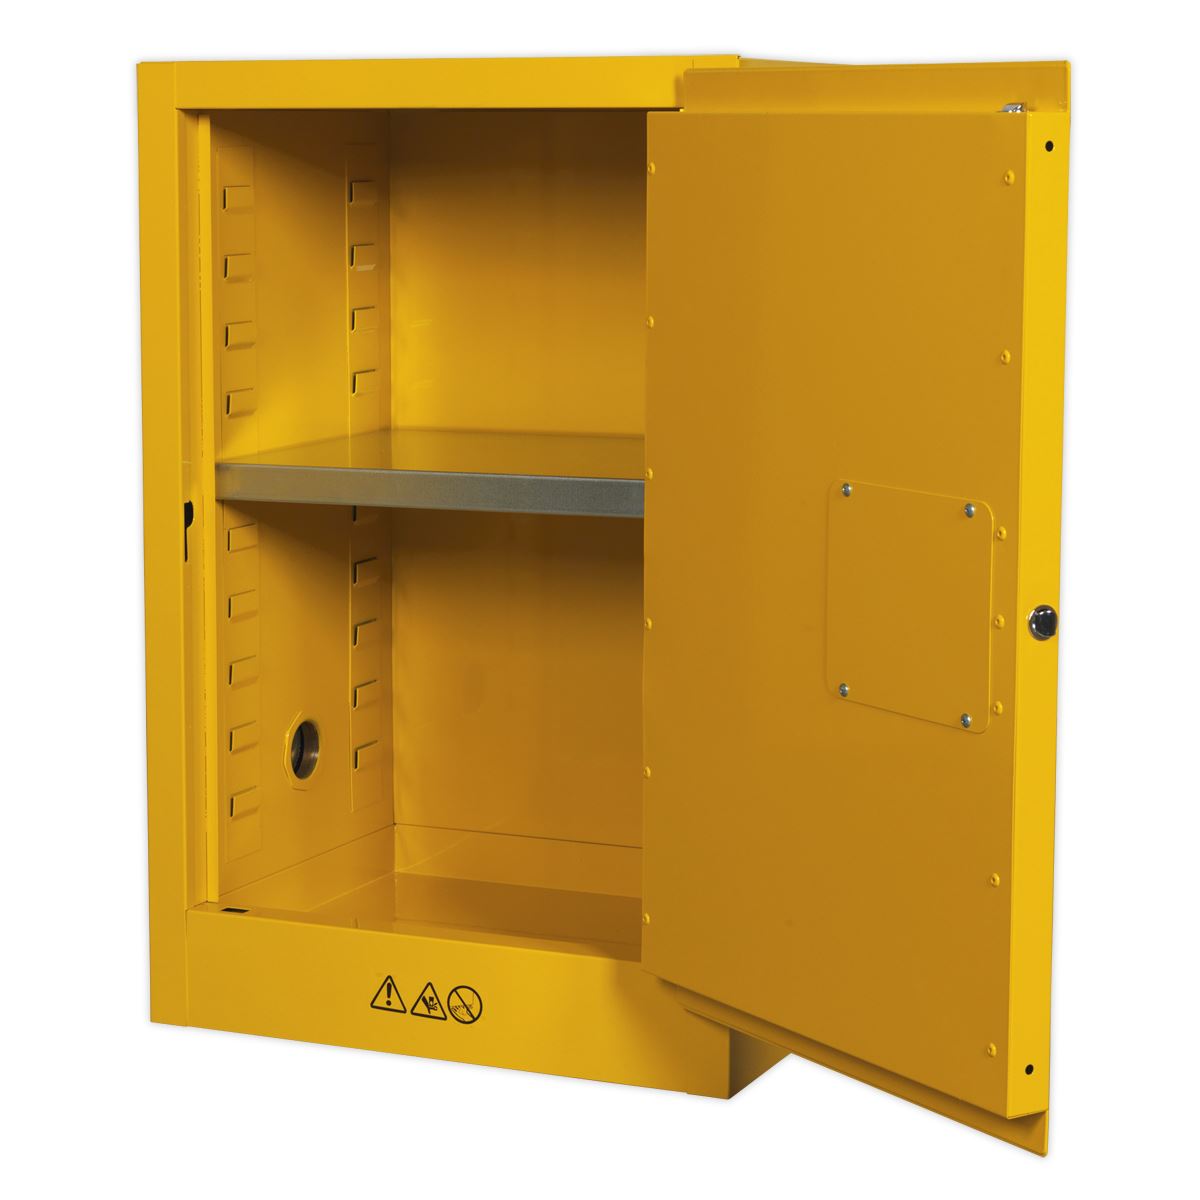 Sealey Flammables Storage Cabinet 585 x 455 x 890mm